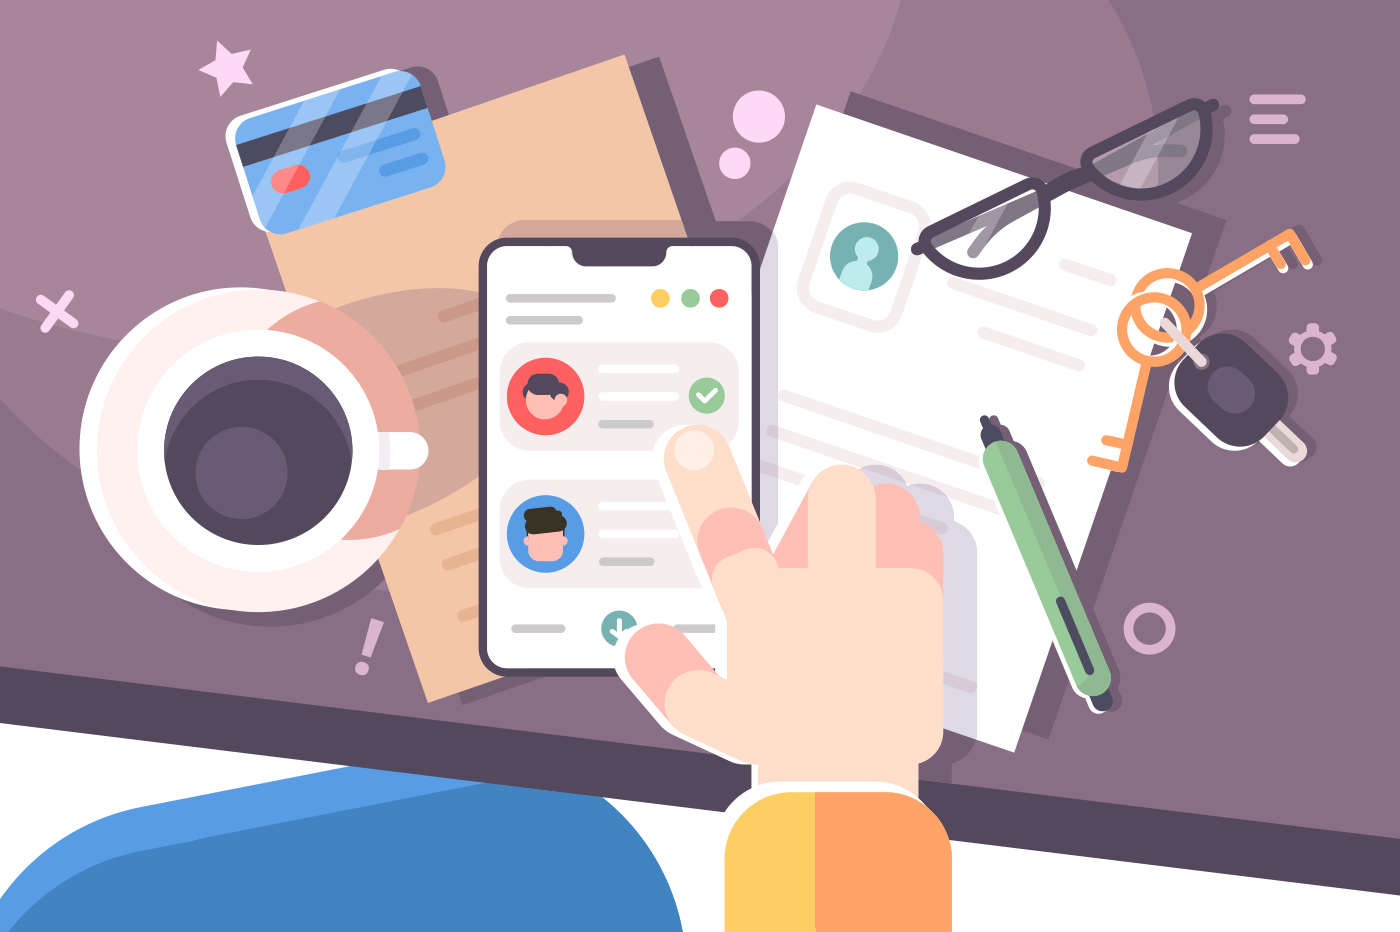 Human hand using smartphone workplace desktop background. Top view of table, folder, smartphone, coffee cup. Work space concept. Flat. Vector illustration.